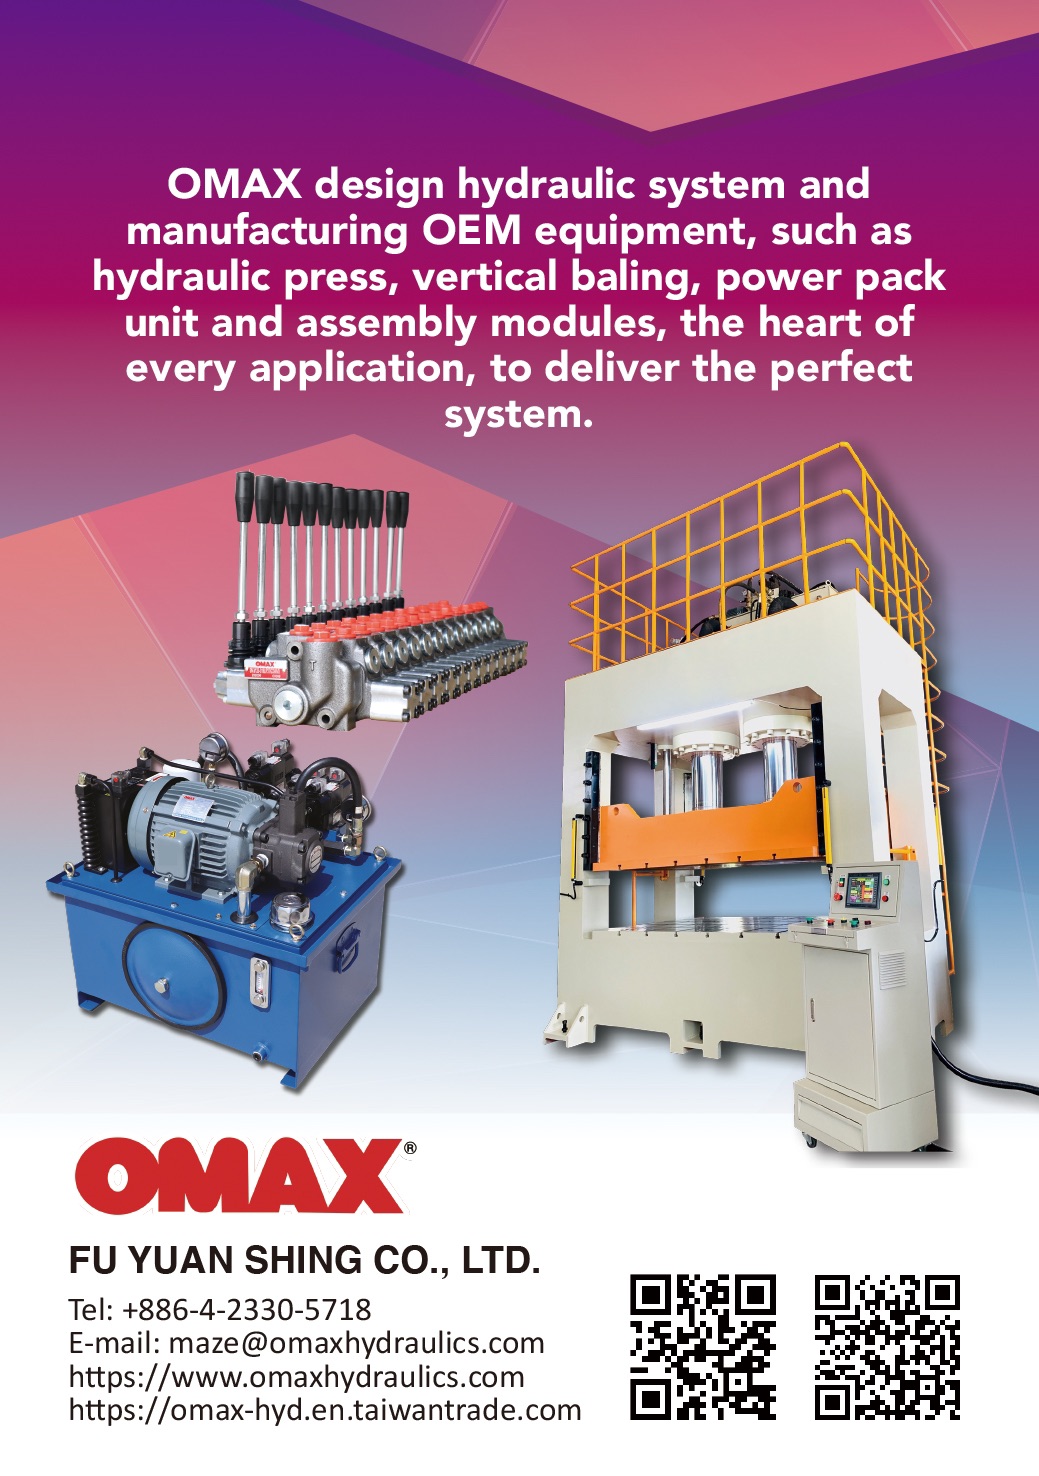 OMAX Hydraulics Equipment on 2022 Taiwan Products Machinery